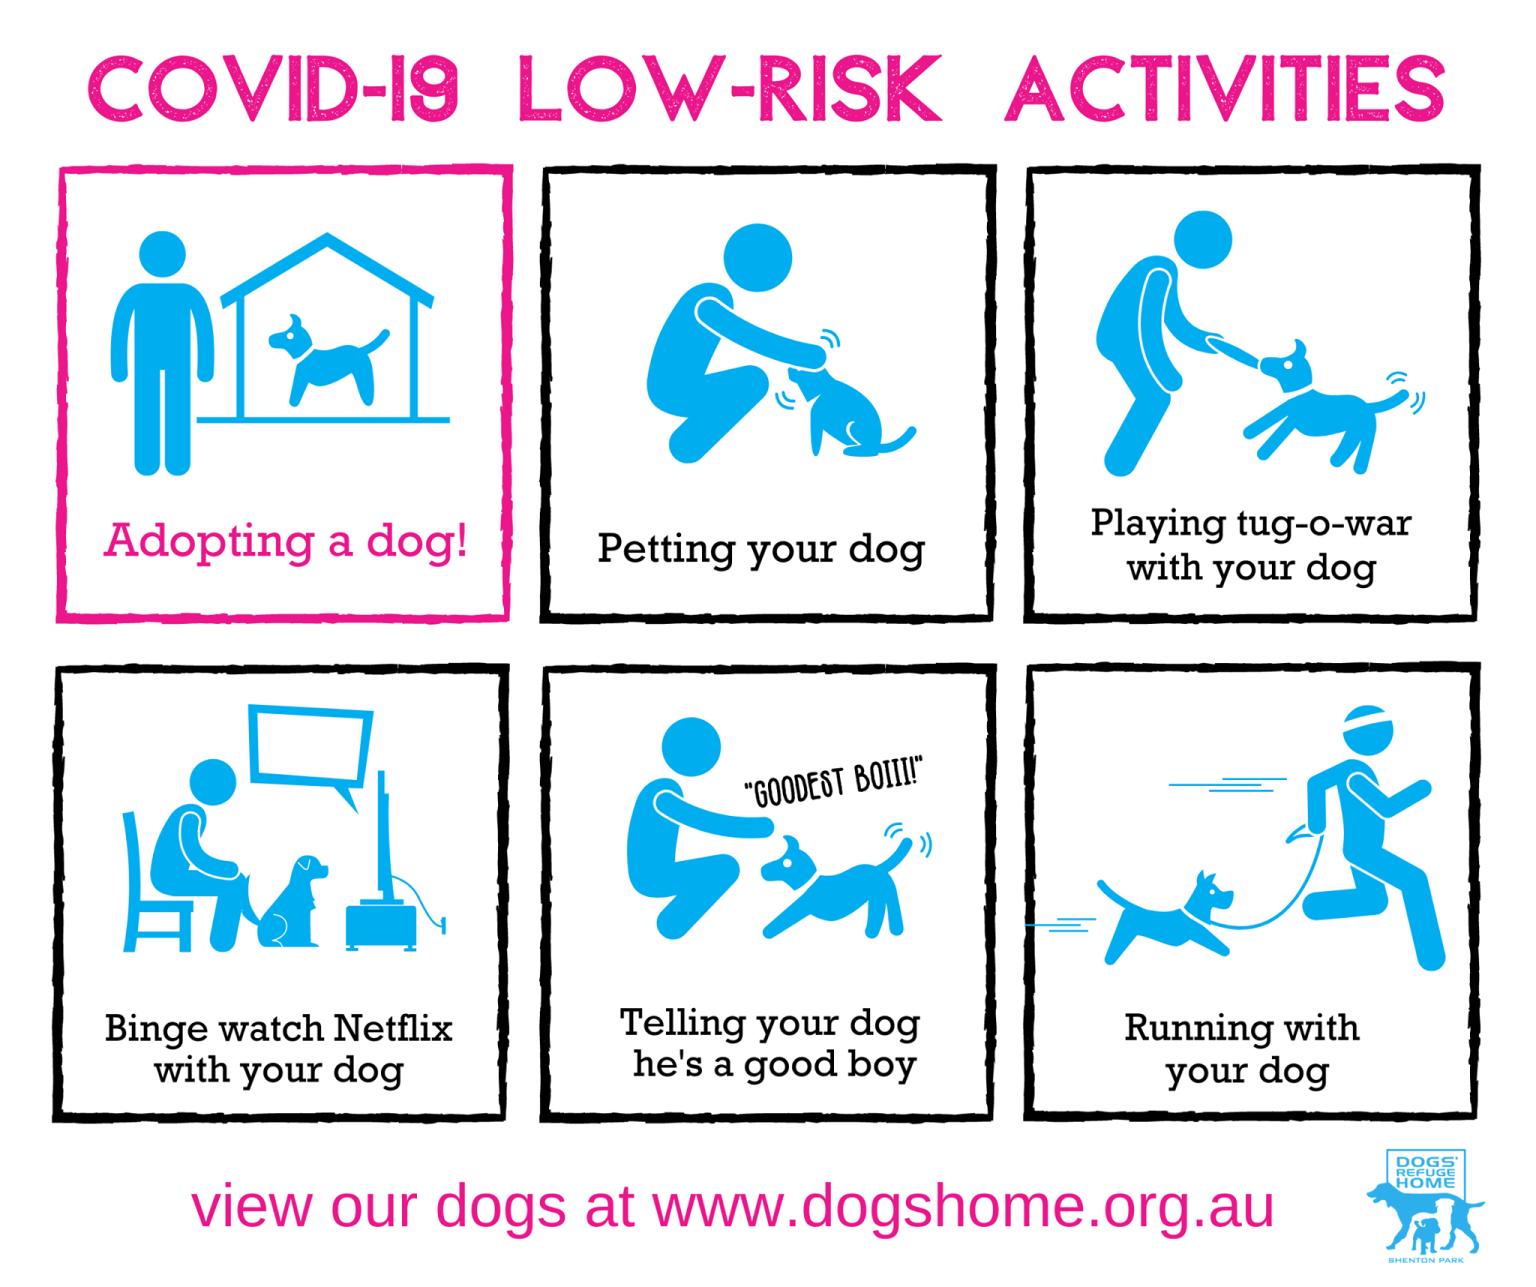 Dogs Refuge Home infographic of activities to do with your dog